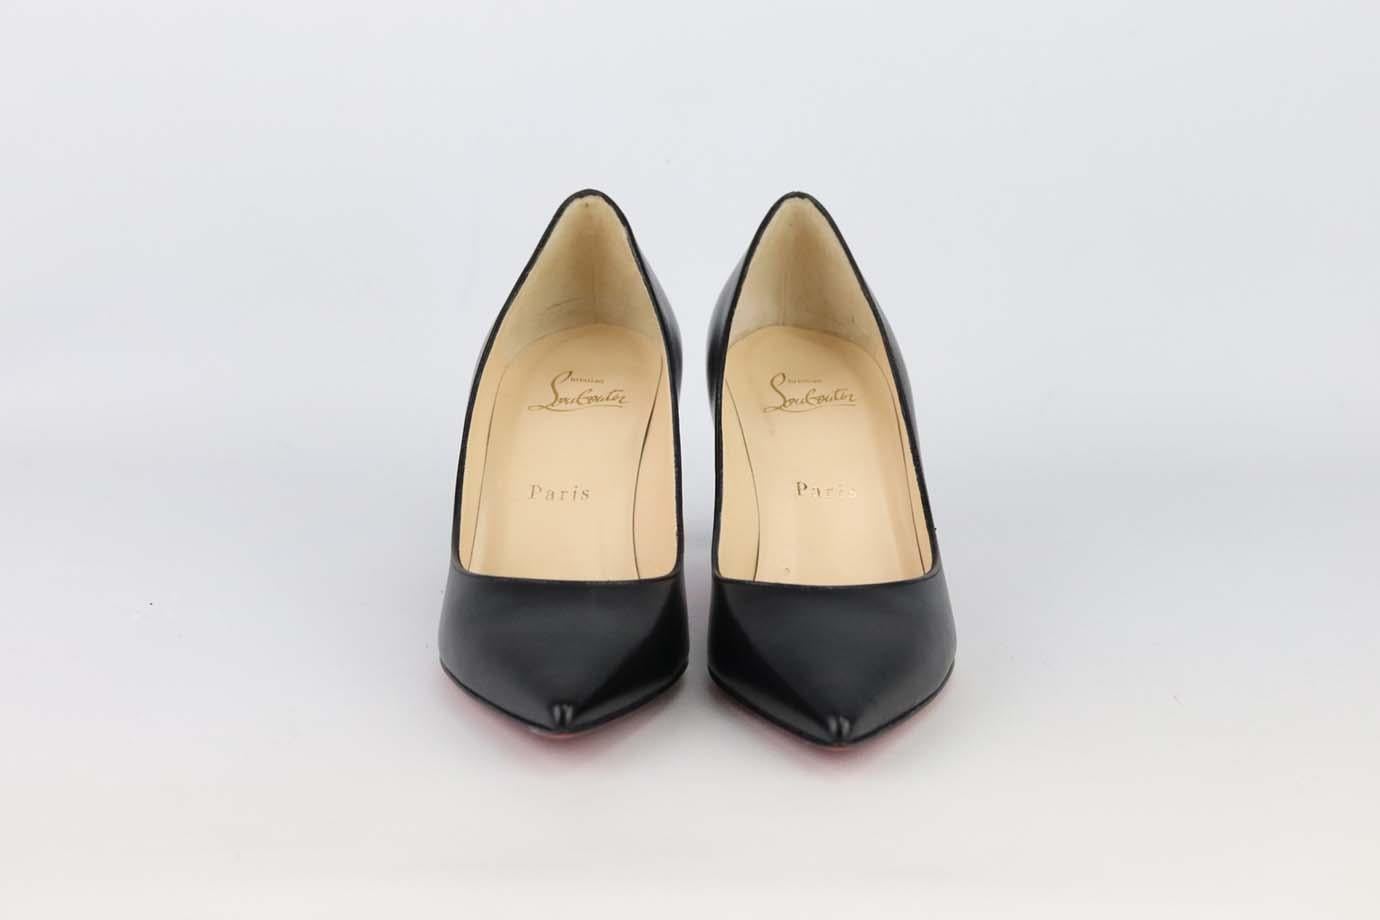 These pumps by Christian Louboutin are a classic style that will never date, made in Italy from black leather, they have sharp pointed toes and comfortable 63mm heels to take you from morning meetings to dinner with friends. Heel measures